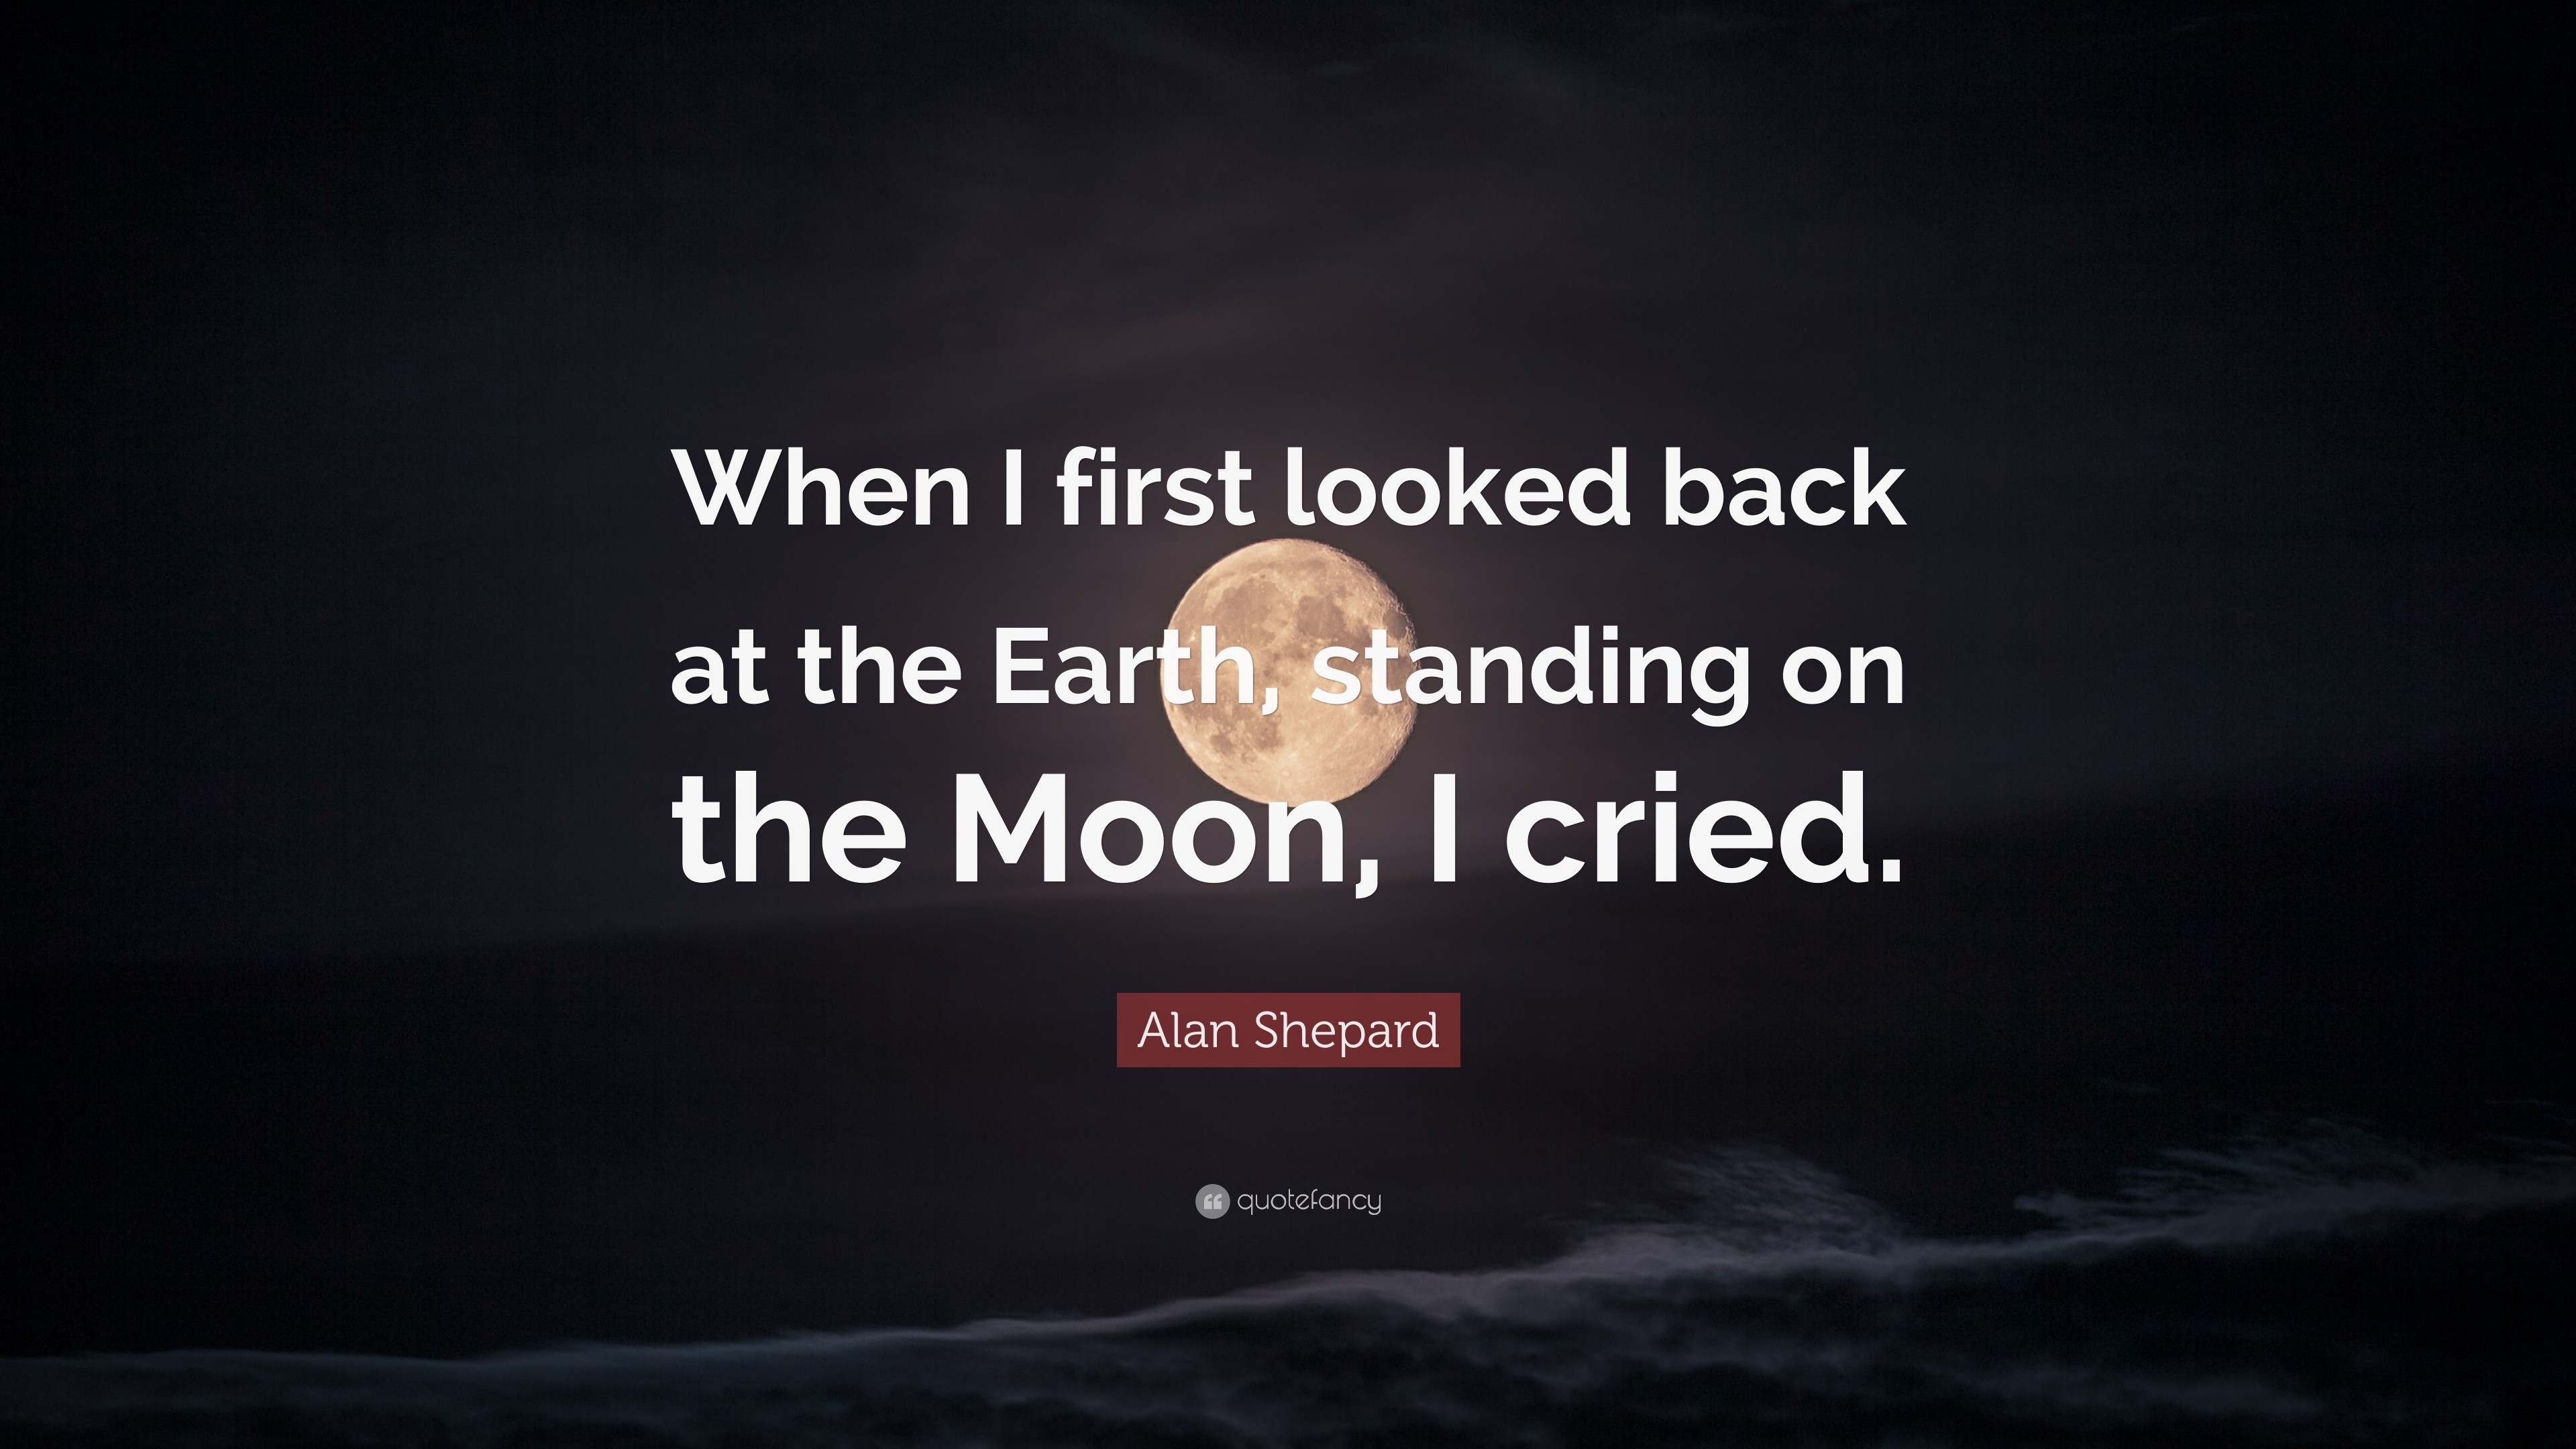 3840x2160 Moon Quotes: “When I first looked back at the Earth, standing on the